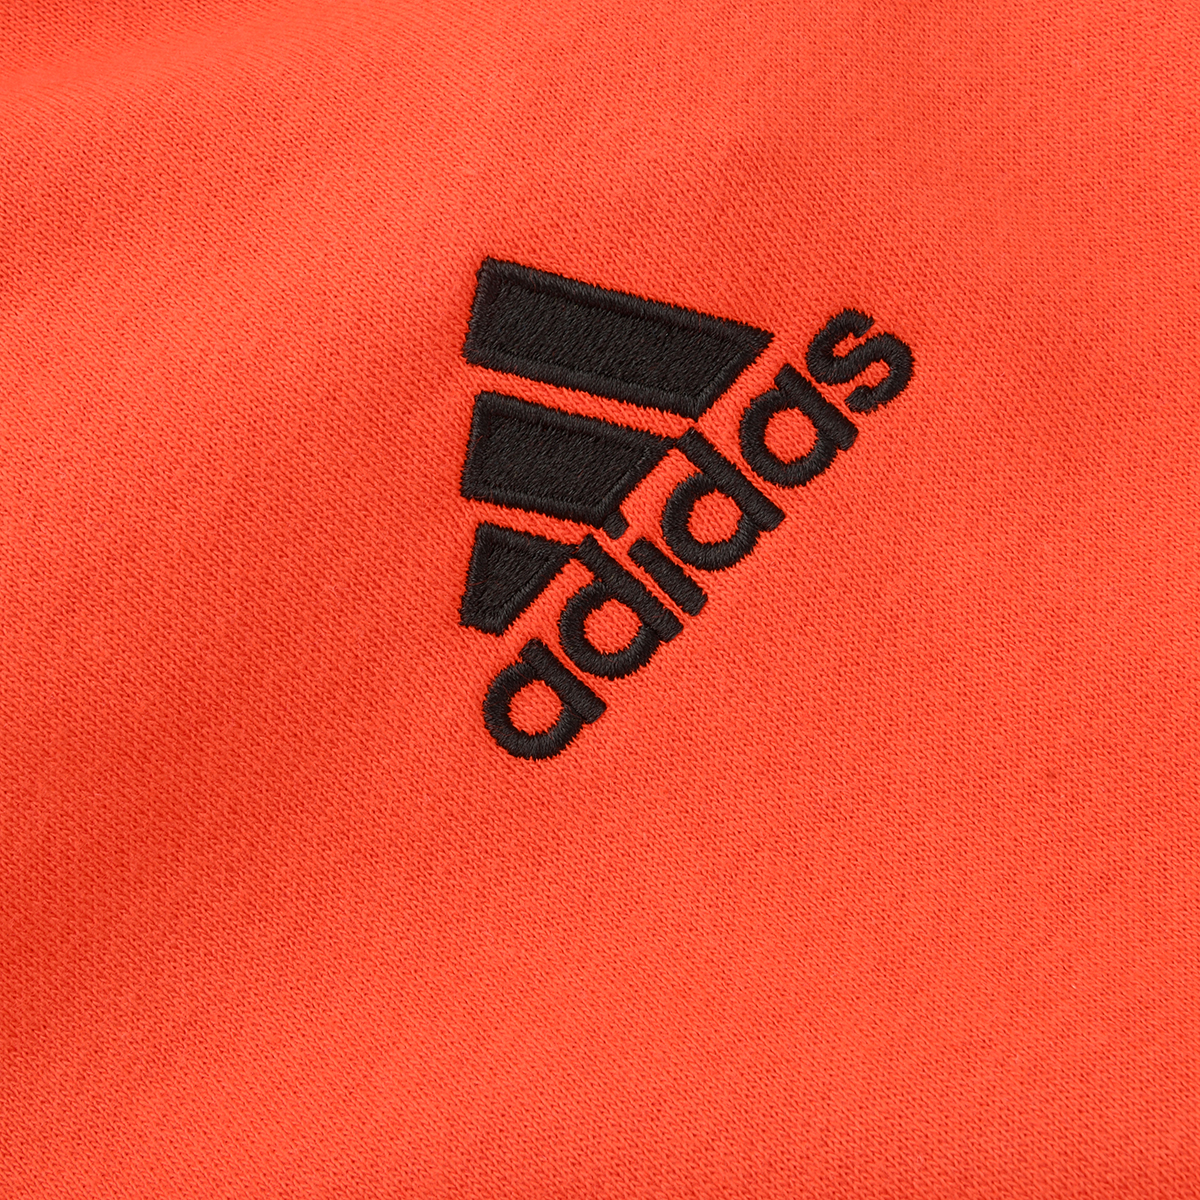 Buzo adidas River Plate 3 Stripes,  image number null